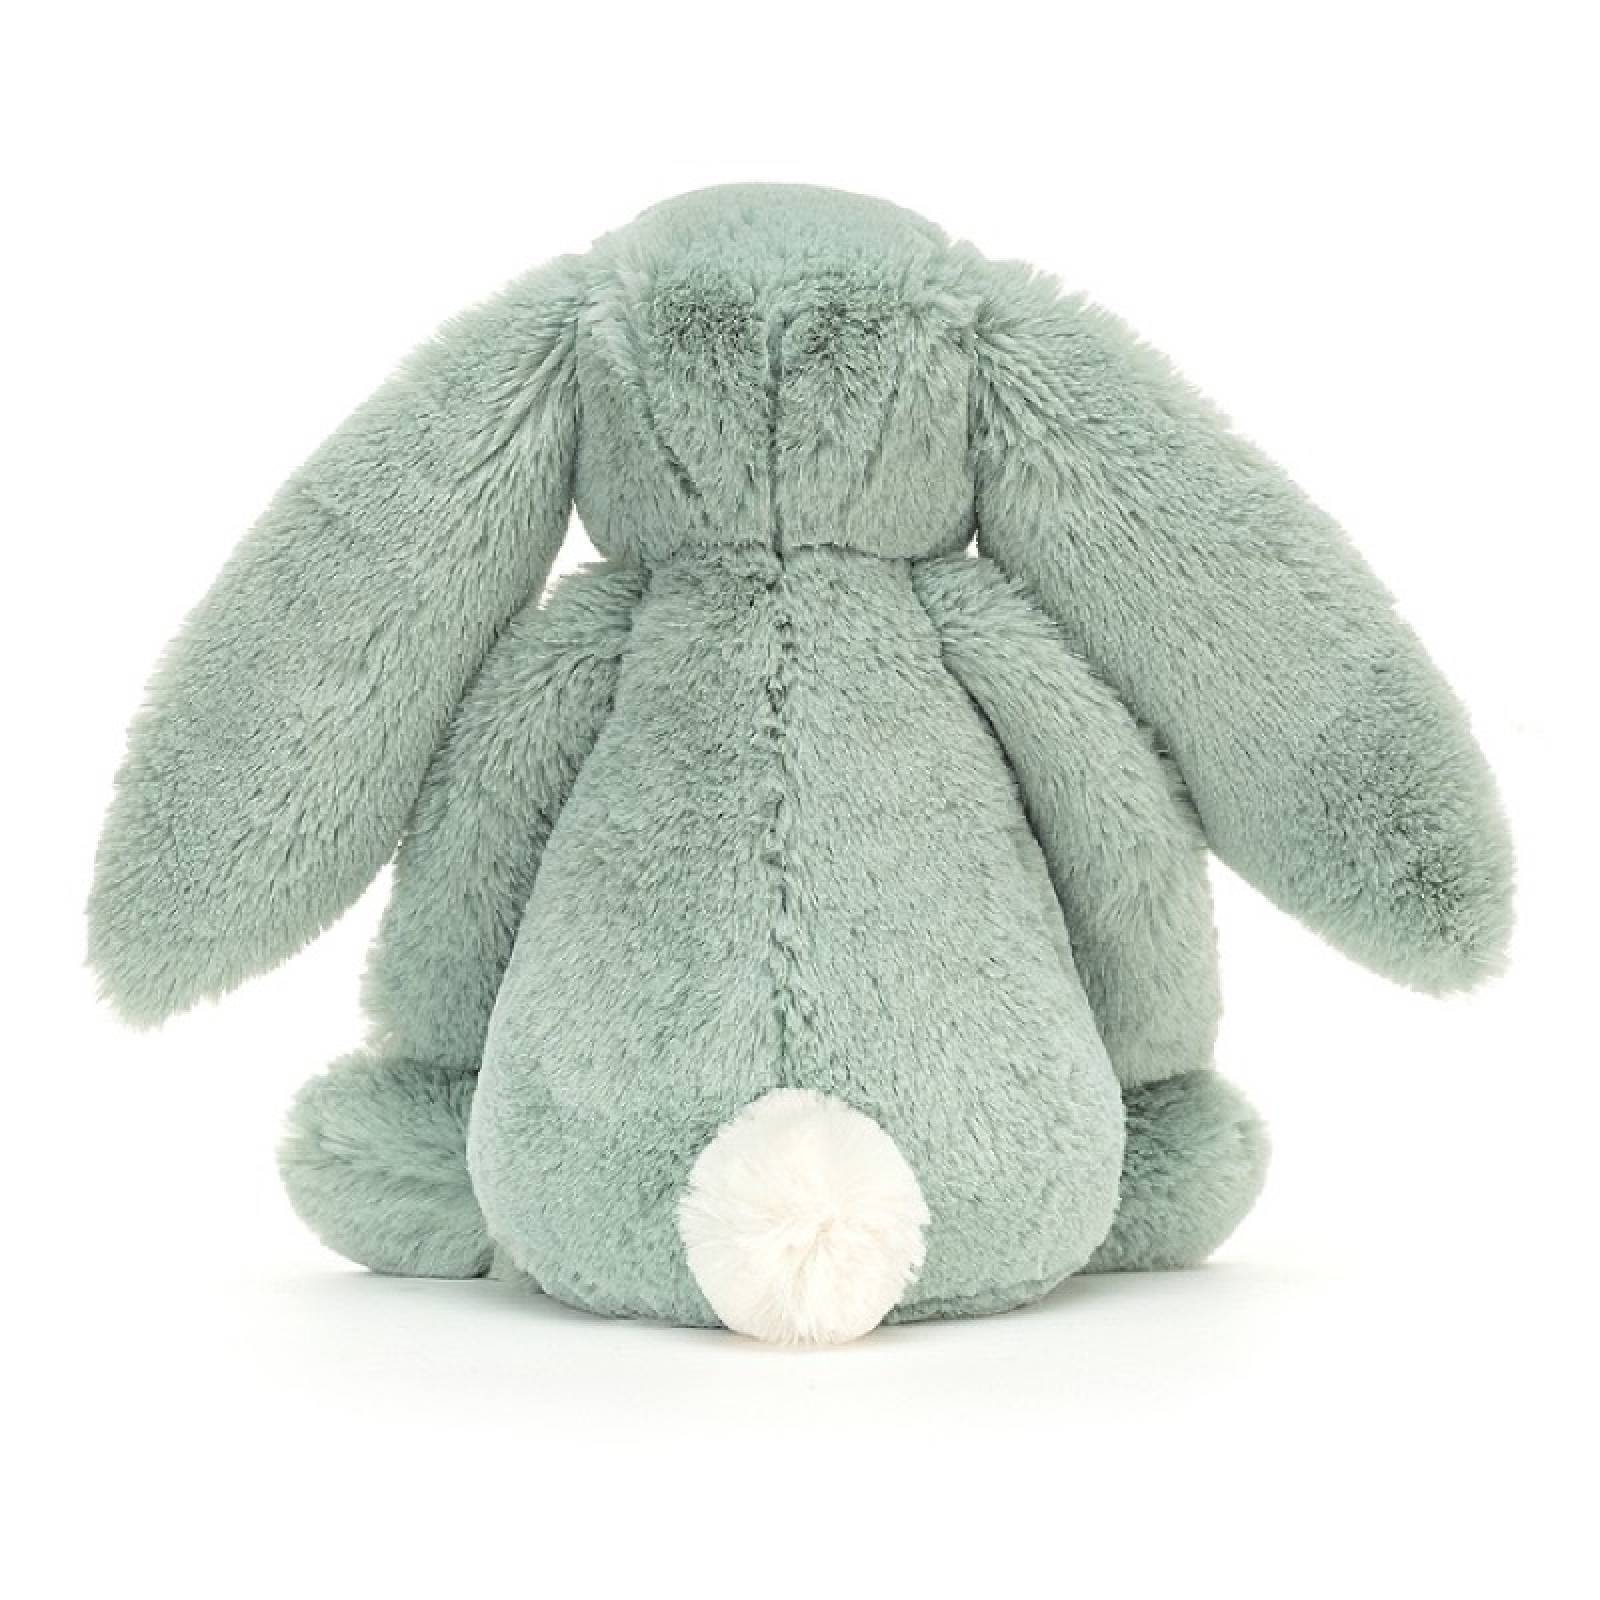 Small Blossom Sage Bunny Soft Toy By Jellycat 0+ thumbnails